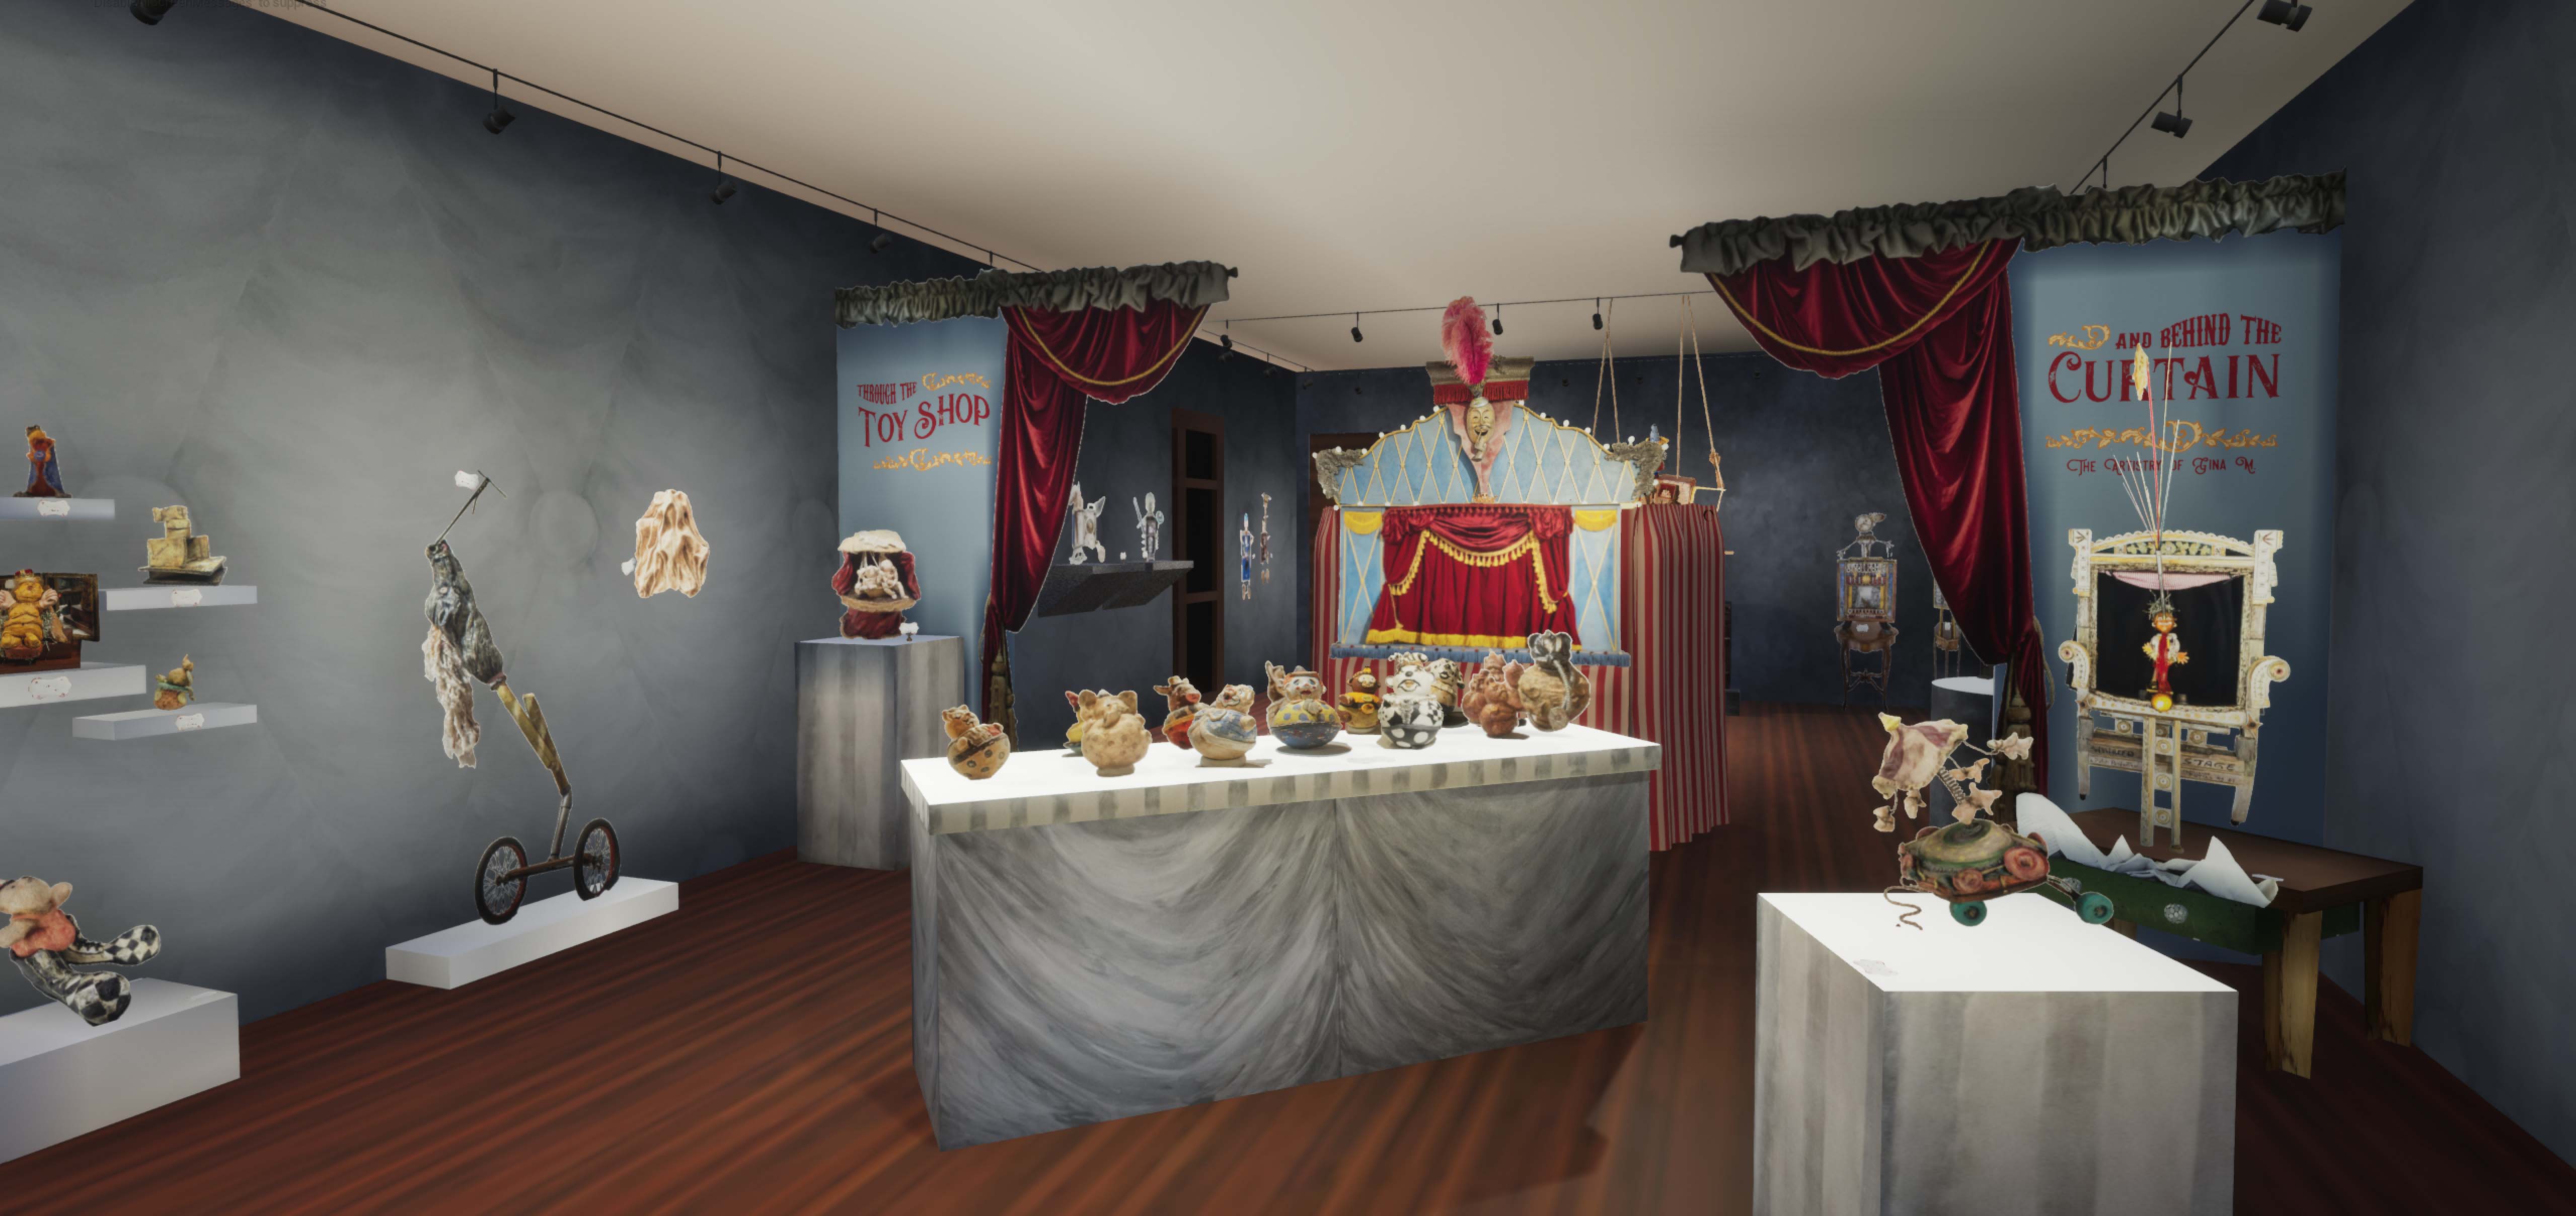 Virtual exhibition render of "Through the Toy Shop and Behind the Curtain" gallery front view